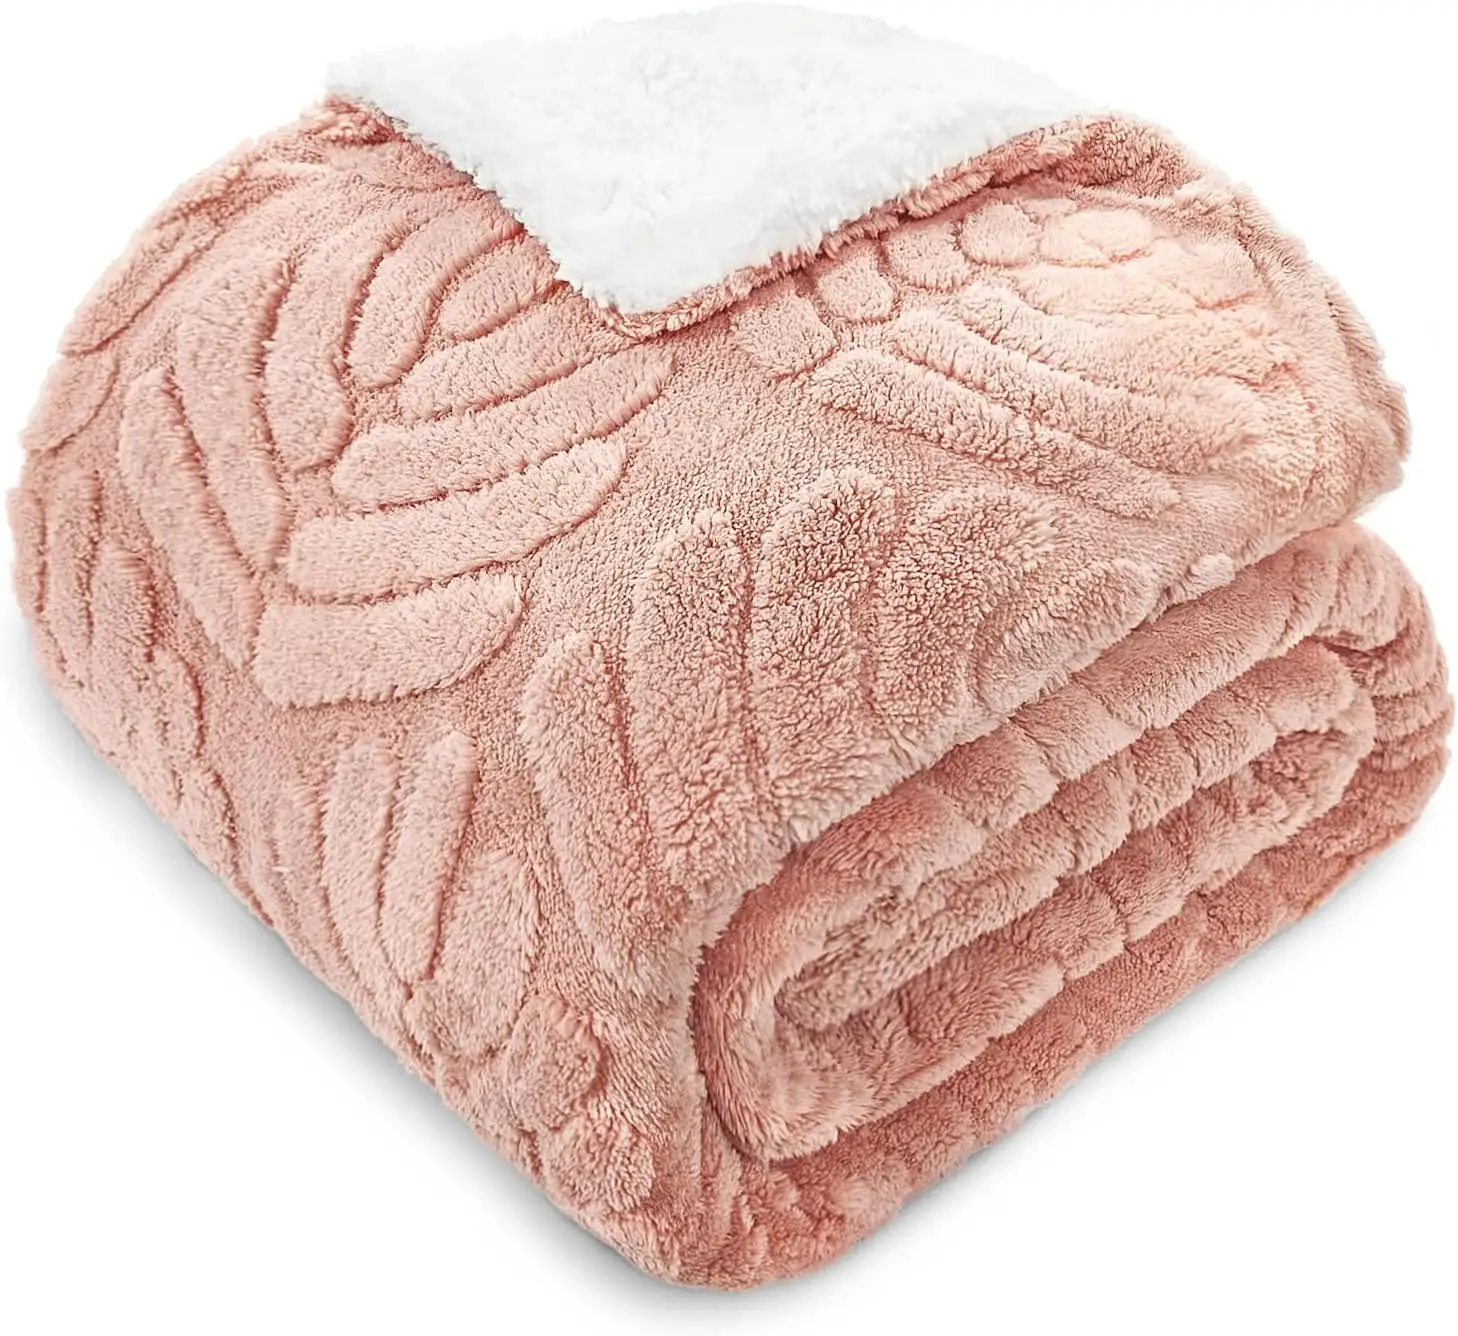 Wholesale Custom Soft Knitted Plush Flannel Throw blanket Sherpa Fleece Bed Throw Blanket For Home Decor